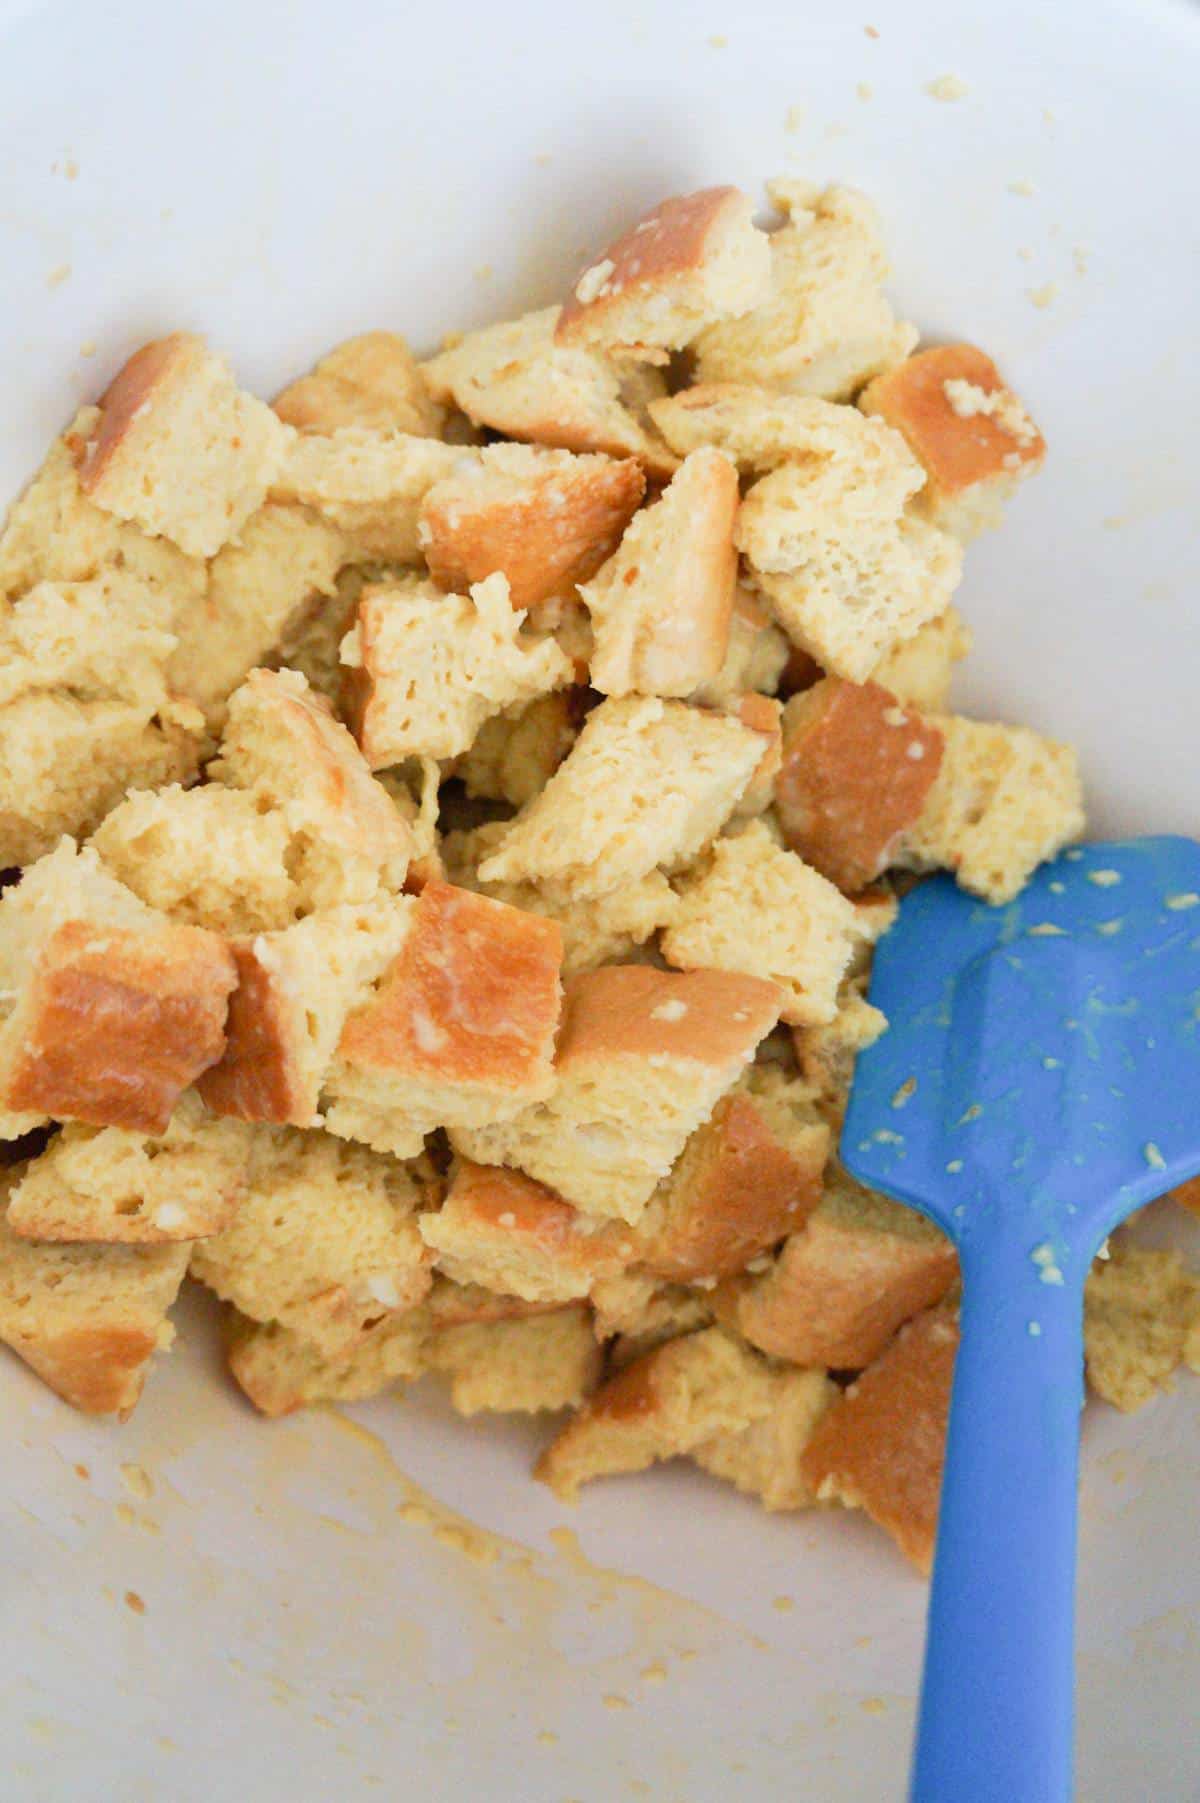 cubed bread coated in egg mixture in a mixing bowl